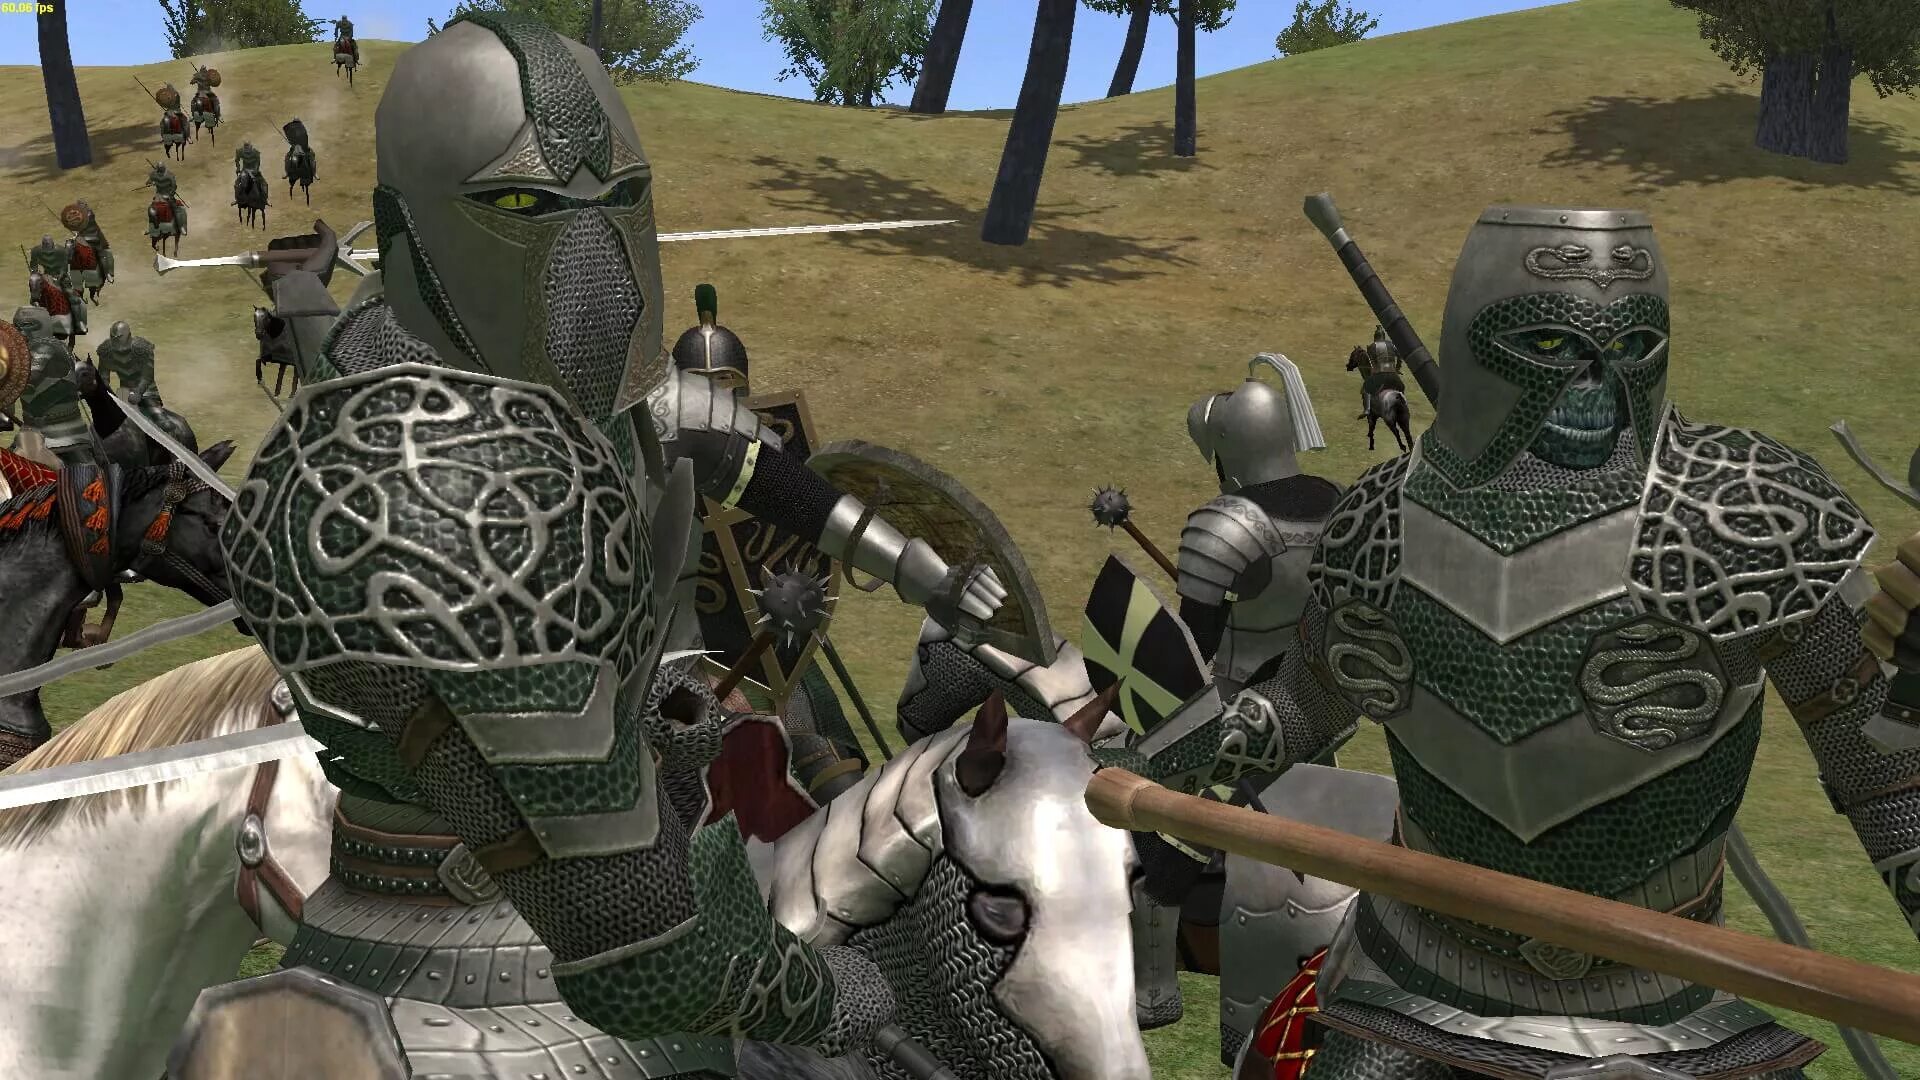 Warband Prophesy of Pendor. Mount and Blade Warband Prophesy of Pendor. Prophesy of Pendor 3. Prophesy of Pendor 3.9.5. Mount blade warband моды на русском